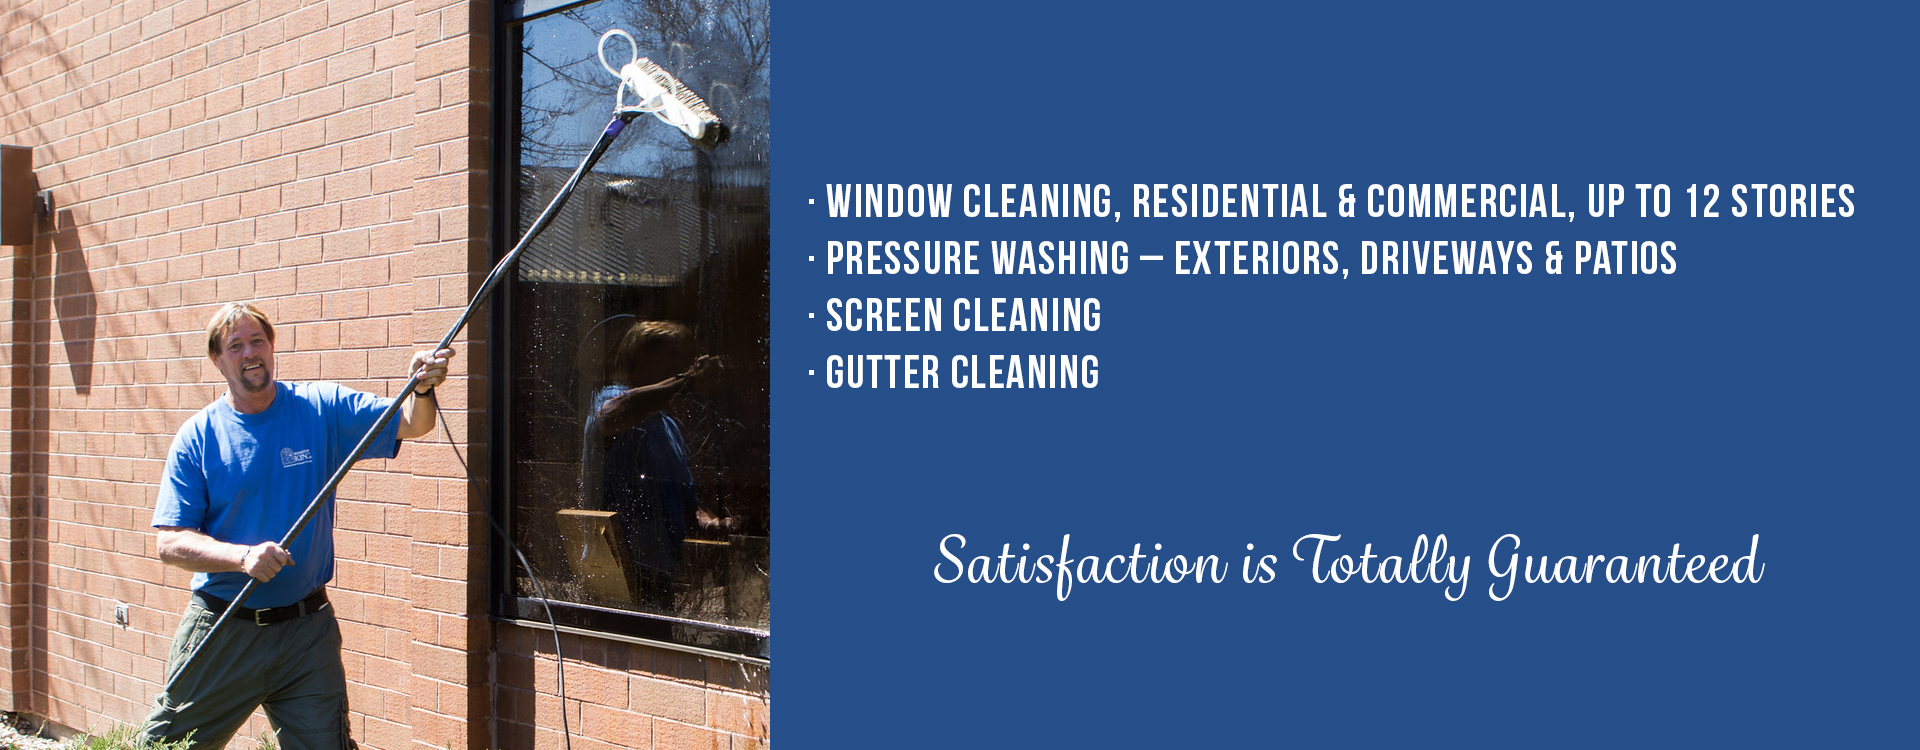 Window King washes and cleans windows up to twelve stories, inside and out, ans also repairs and cleans screens and rain gutters. Window King also provides pressure washing of exteriors, driveways, and patios.